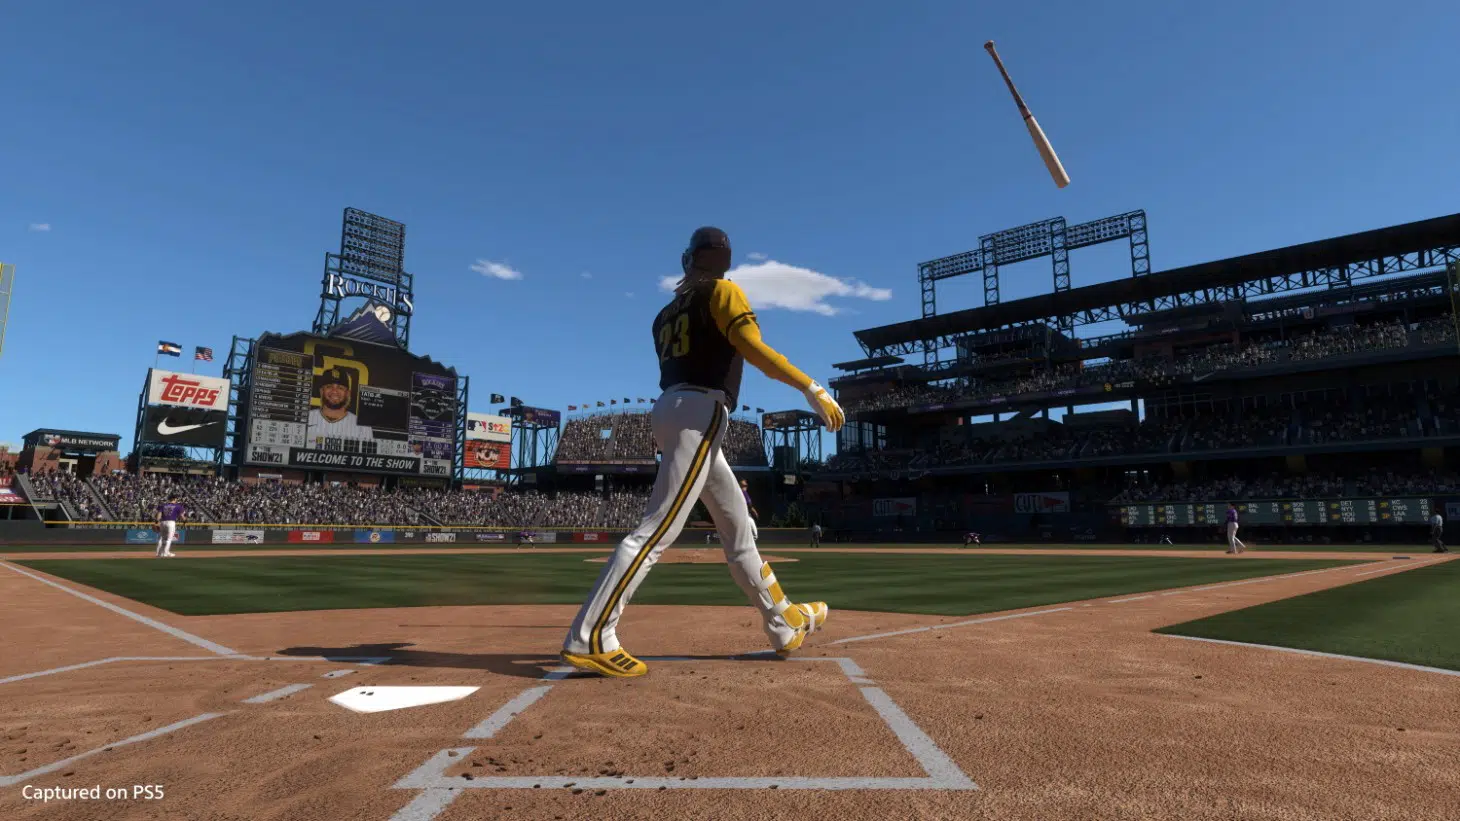 mlb the show 21 update 1.17